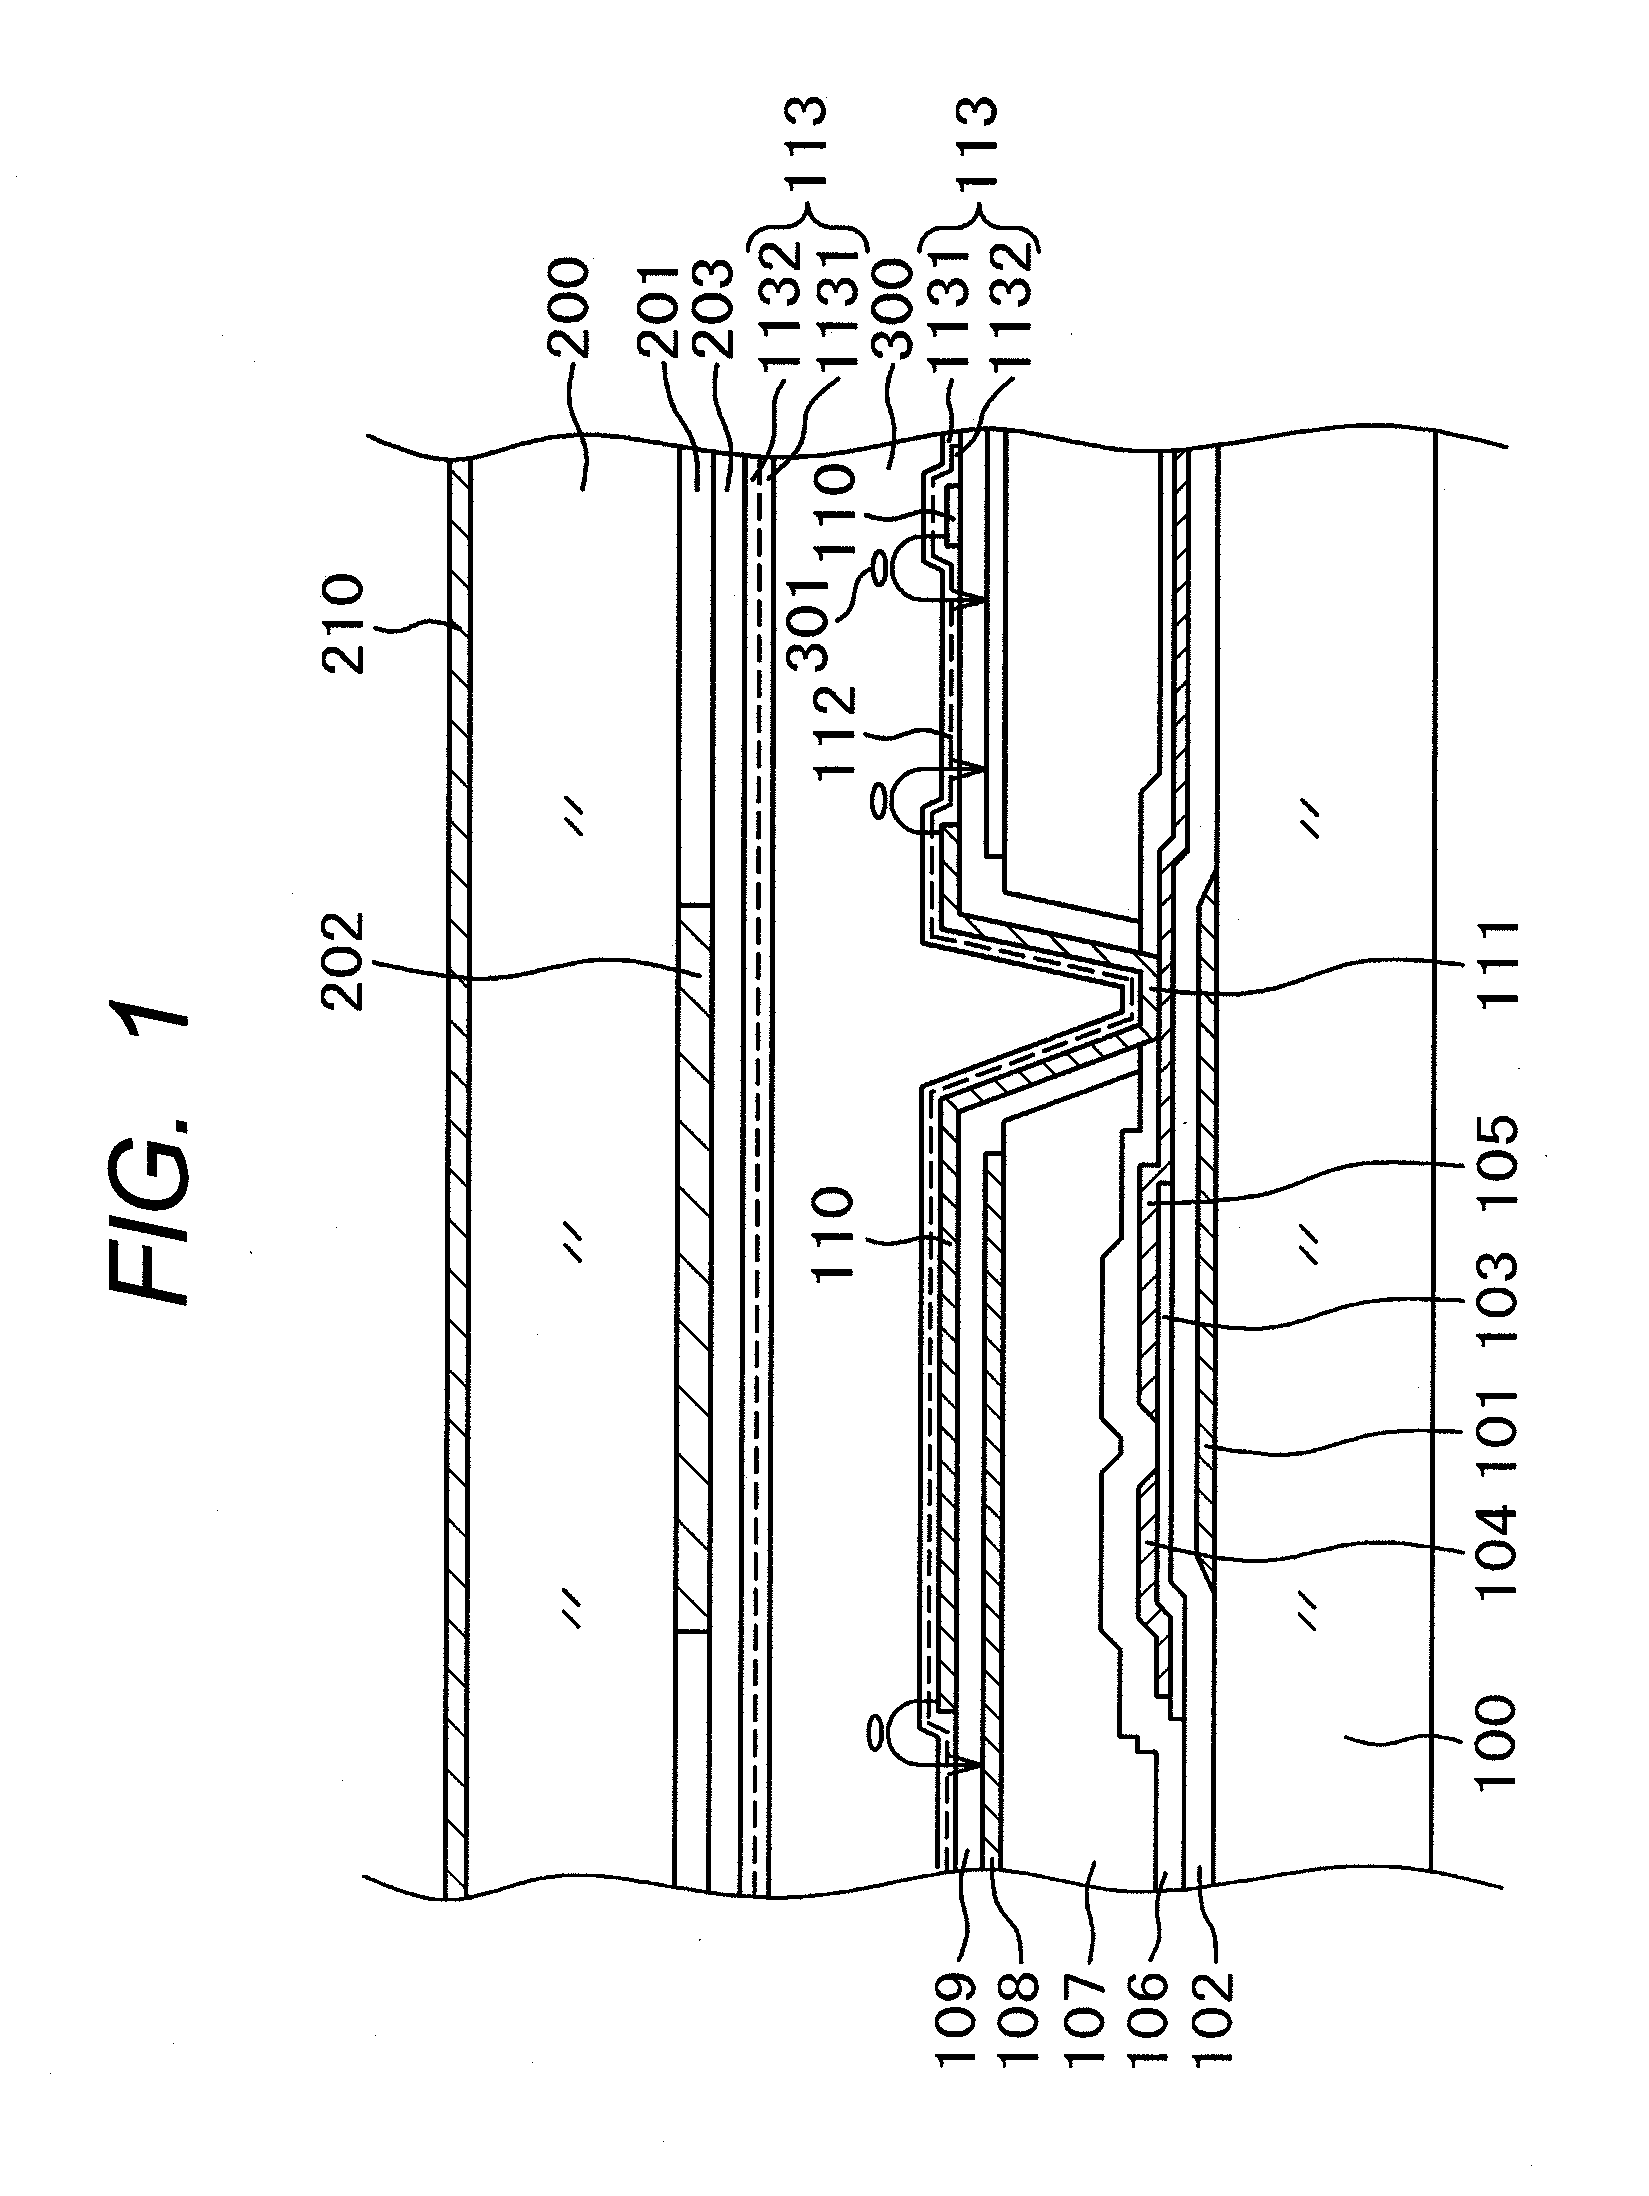 Liquid crystal display device comprising an alignment film that includes a first alignment film formed of a precursor of polyamide acid or polyamide acid ester and a second alignment film underlying the first alignment film wherein the first alignment film accounts for between 30% and 60% of the alignment film